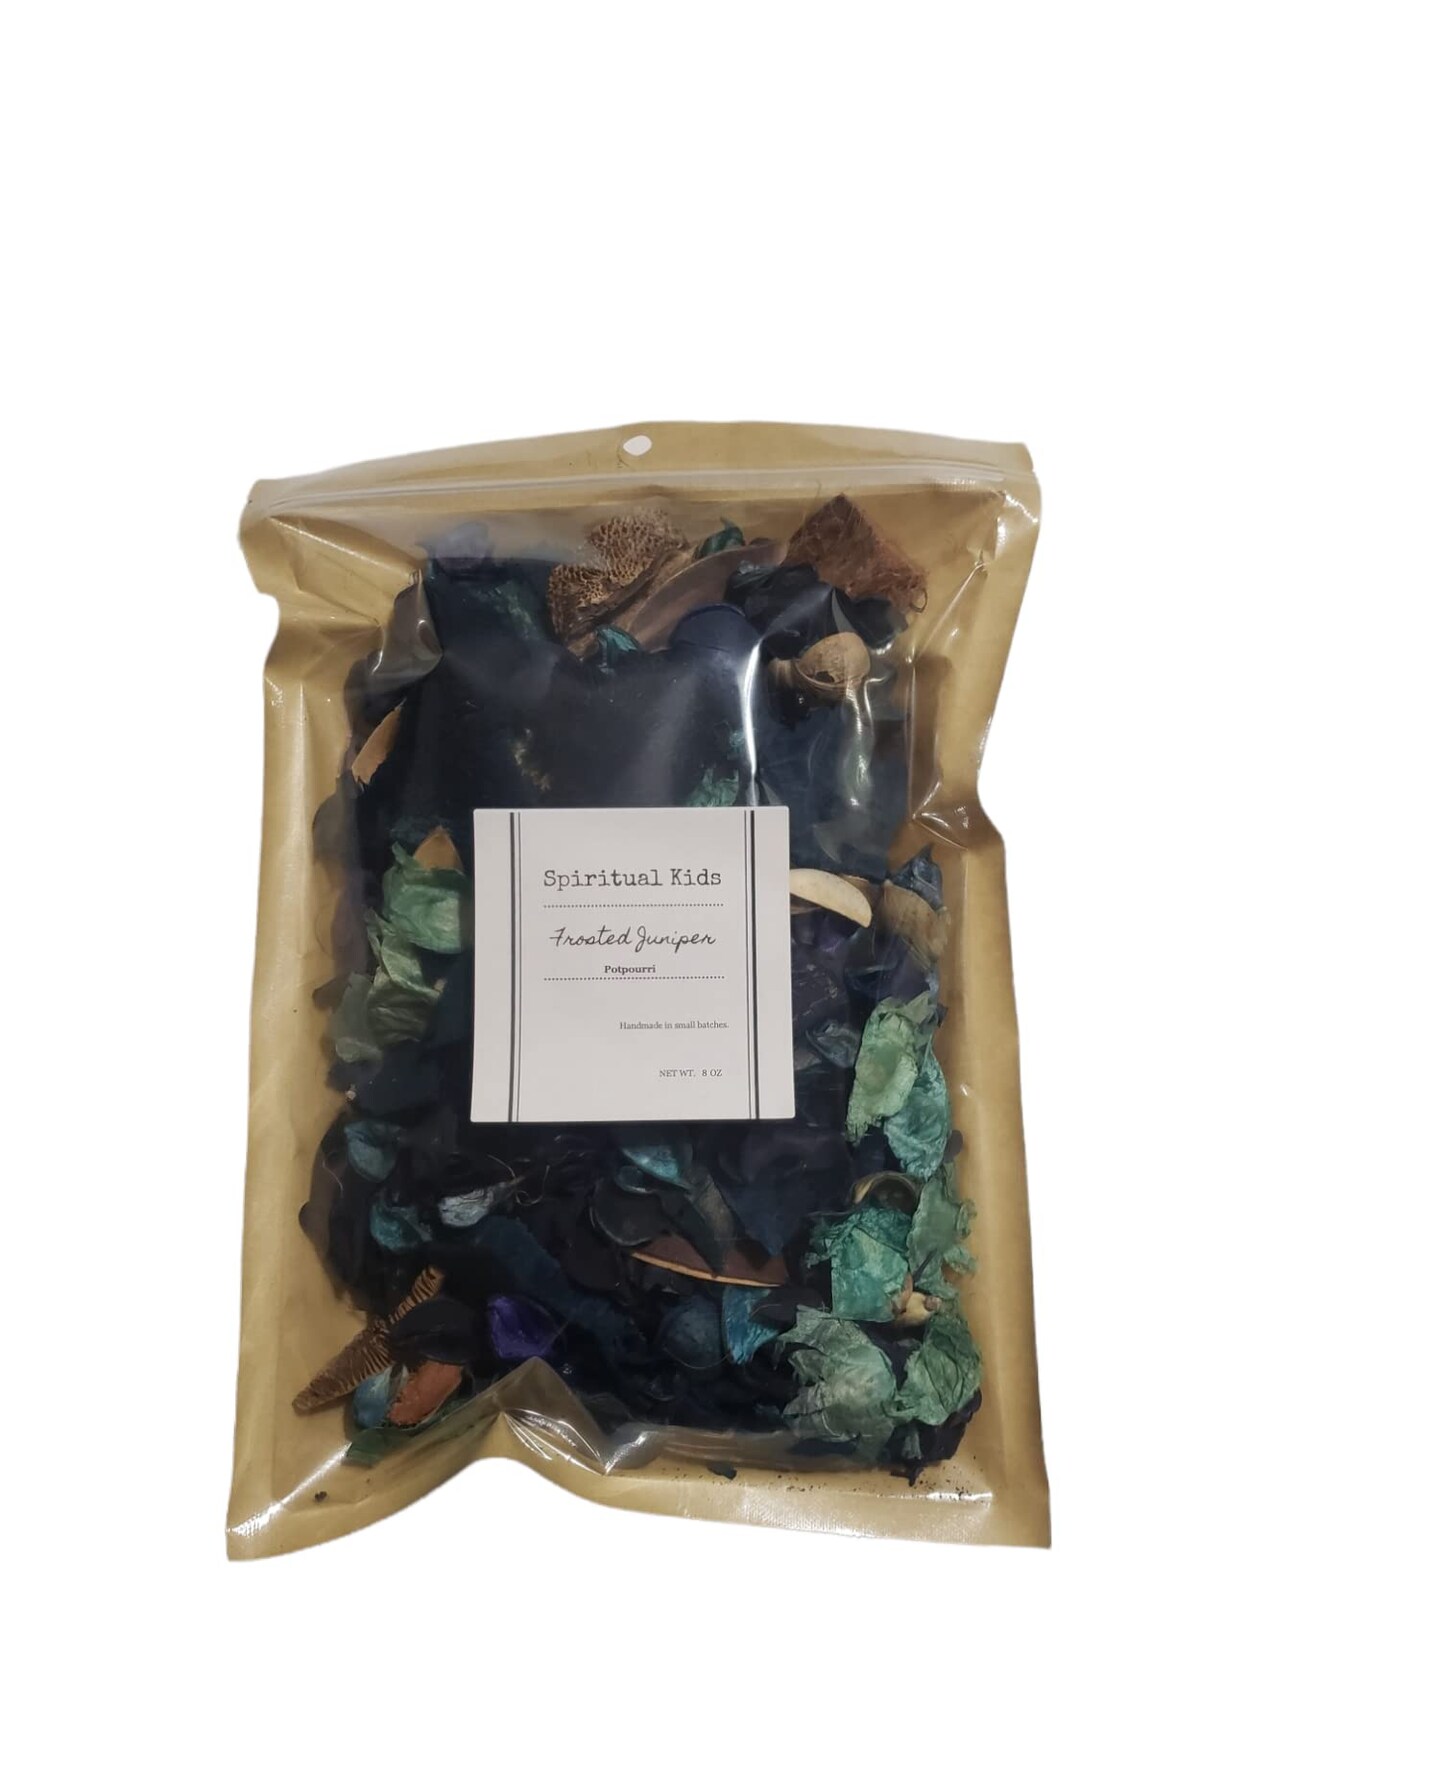 Frosted Juniper Potpourri 8oz Bag made with Fragrant/Essential Oils Hand Made FREE SHIPPING SCENTED | Floral Gift | House Warming Gift | Floral Potpourri | Birthday Gift |